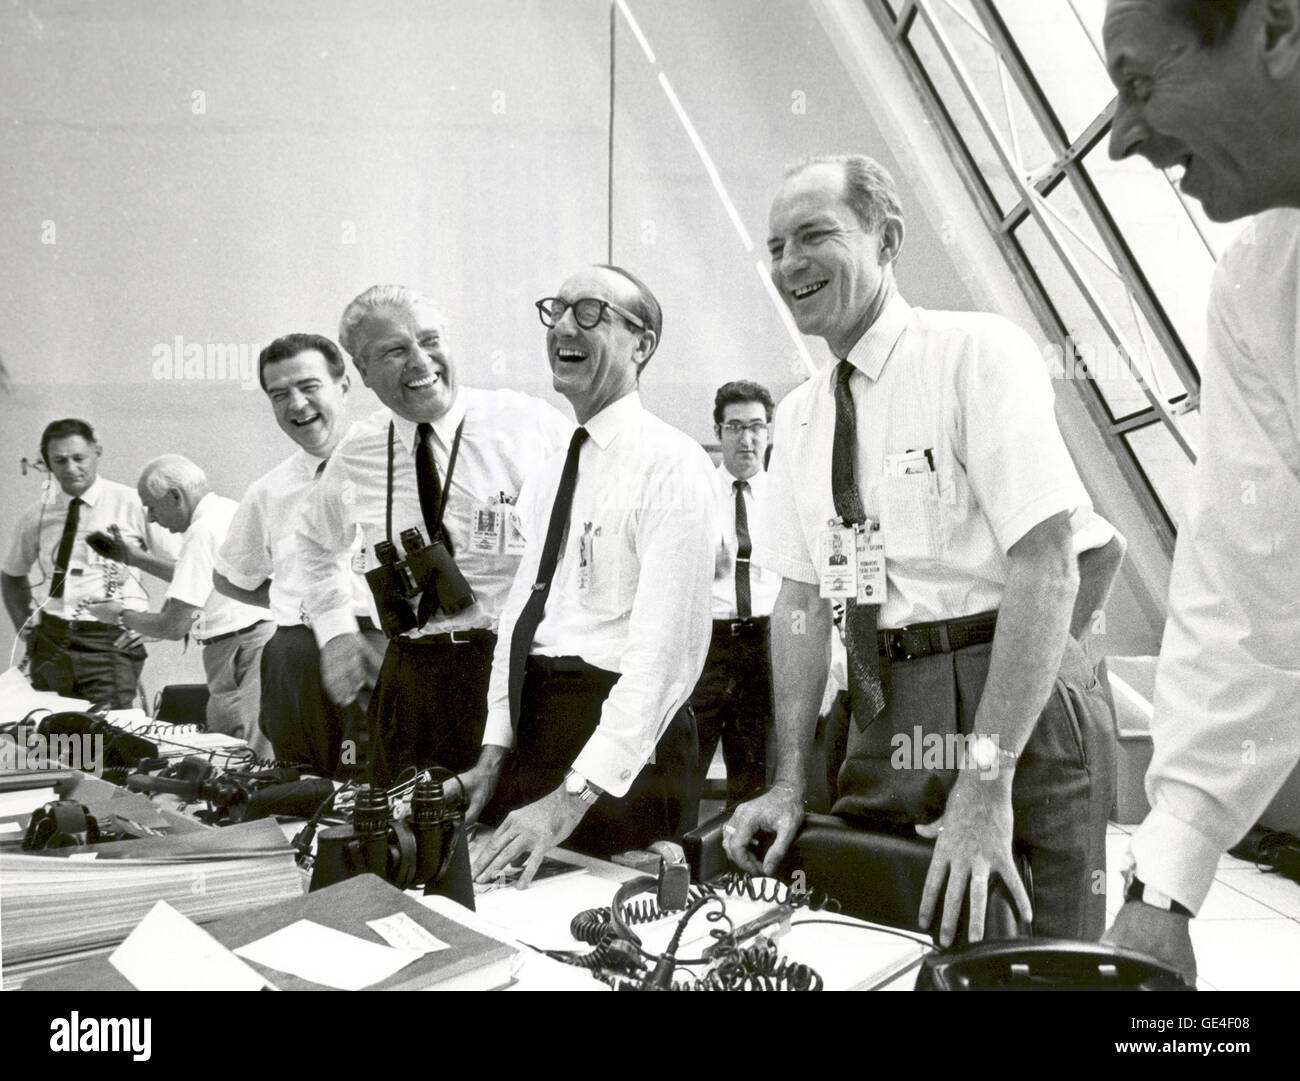 (July 16, 1969) Apollo 11 mission officials relax in the Launch Control Center following the successful Apollo 11 liftoff on July 16, 1969. From left to right are: Charles W. Mathews, Deputy Associate Administrator for Manned Space Flight; Dr. Wernher von Braun, Director of the Marshall Space Flight Center; George Mueller, Associate Administrator for the Office of Manned Space Flight; Lt. Gen. Samuel C. Phillips, Director of the Apollo Program   Image # : 108-KSC-69P-641 Stock Photo